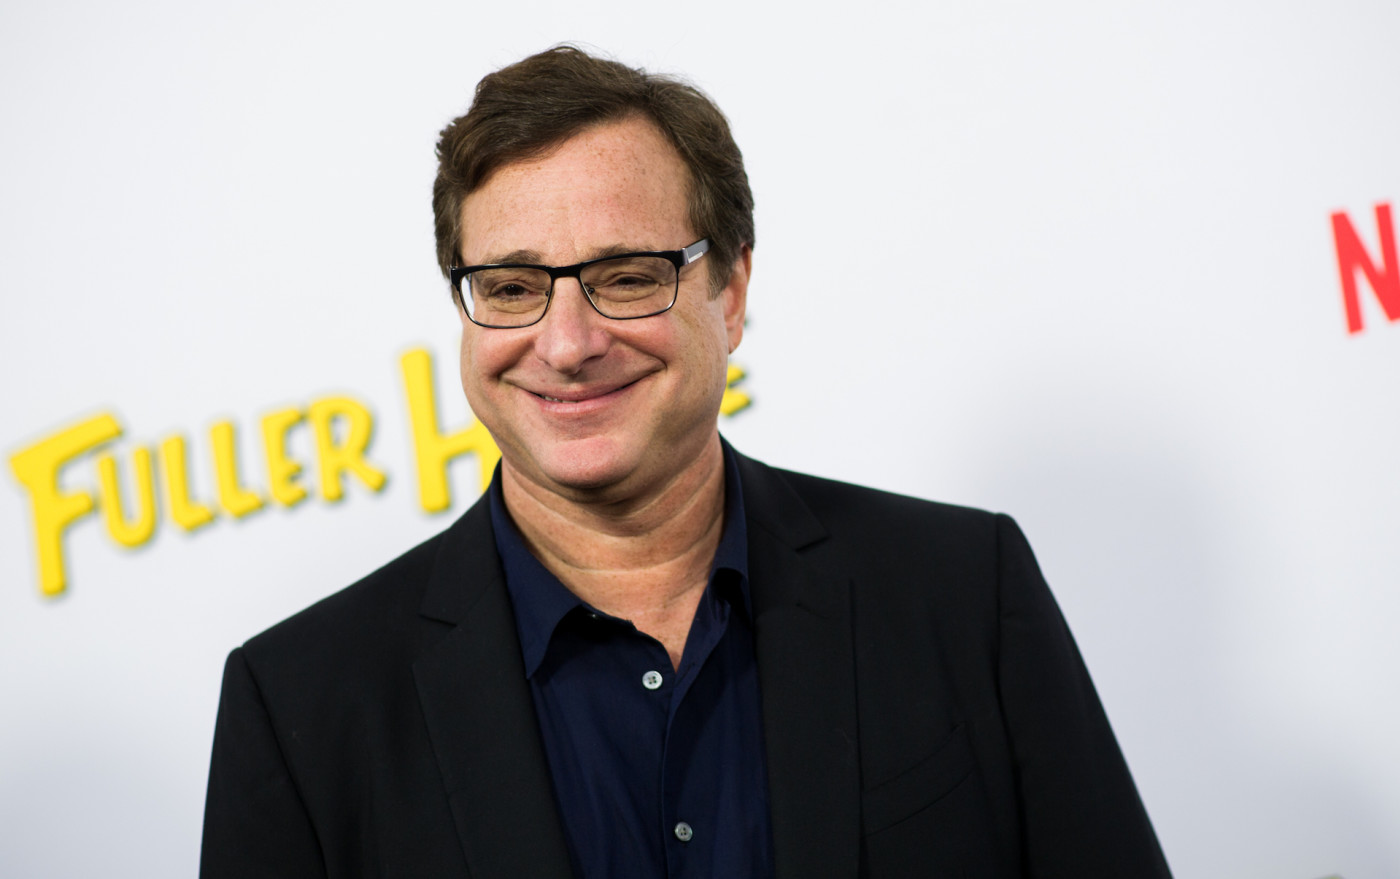 Photos Taken of Bob Saget After His Death Will Be Blocked From Public